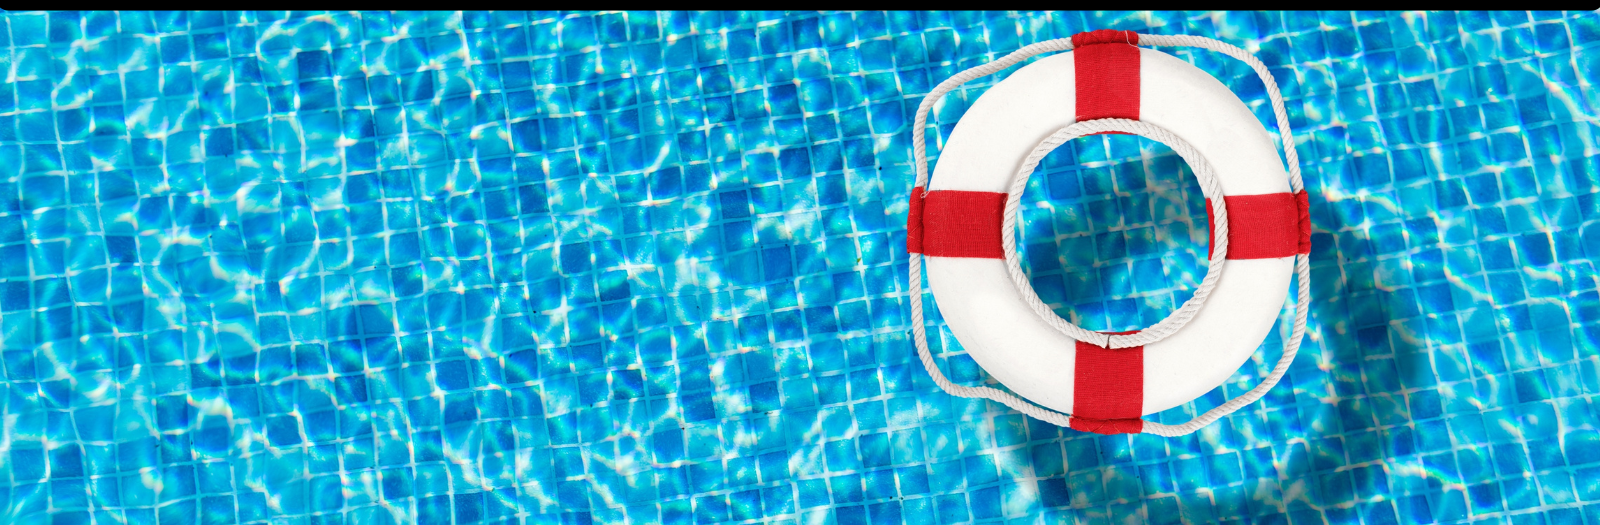 Flotation device in a pool